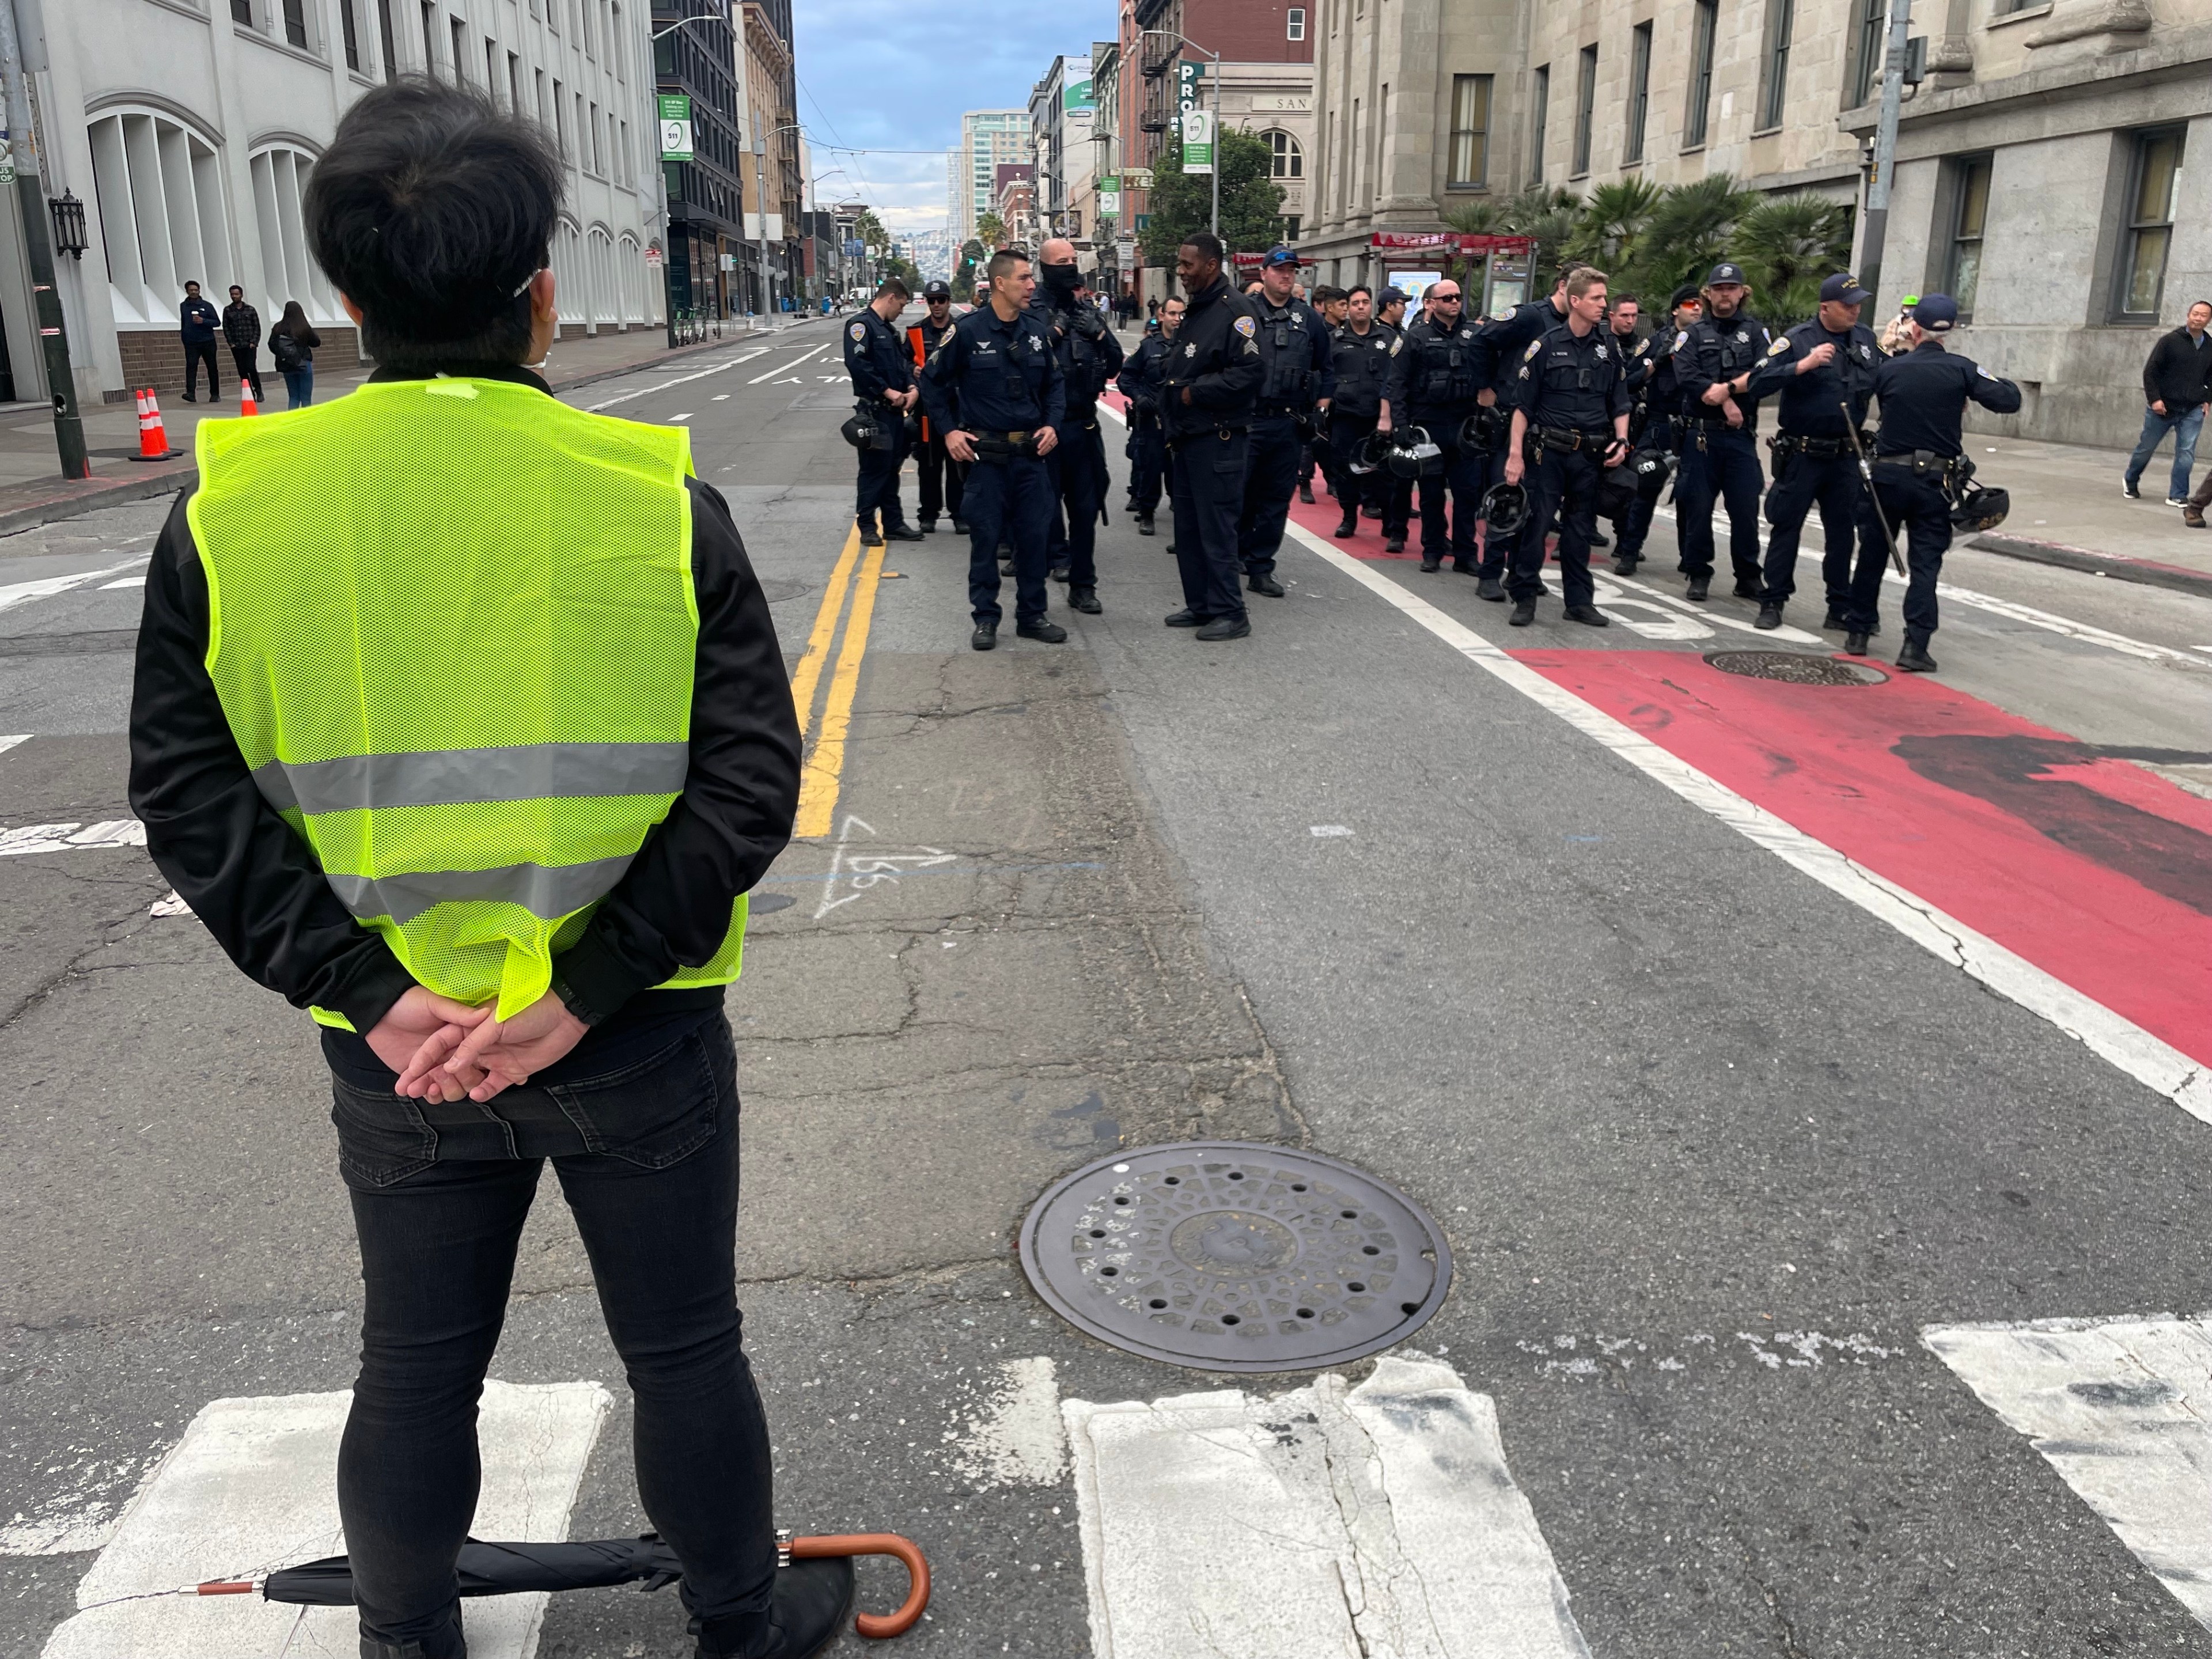 A person wearing dark clothing with arms folded behind them stands in a crosswalk a short distance from a group of police in dark colored uniforms in the middle of a street.